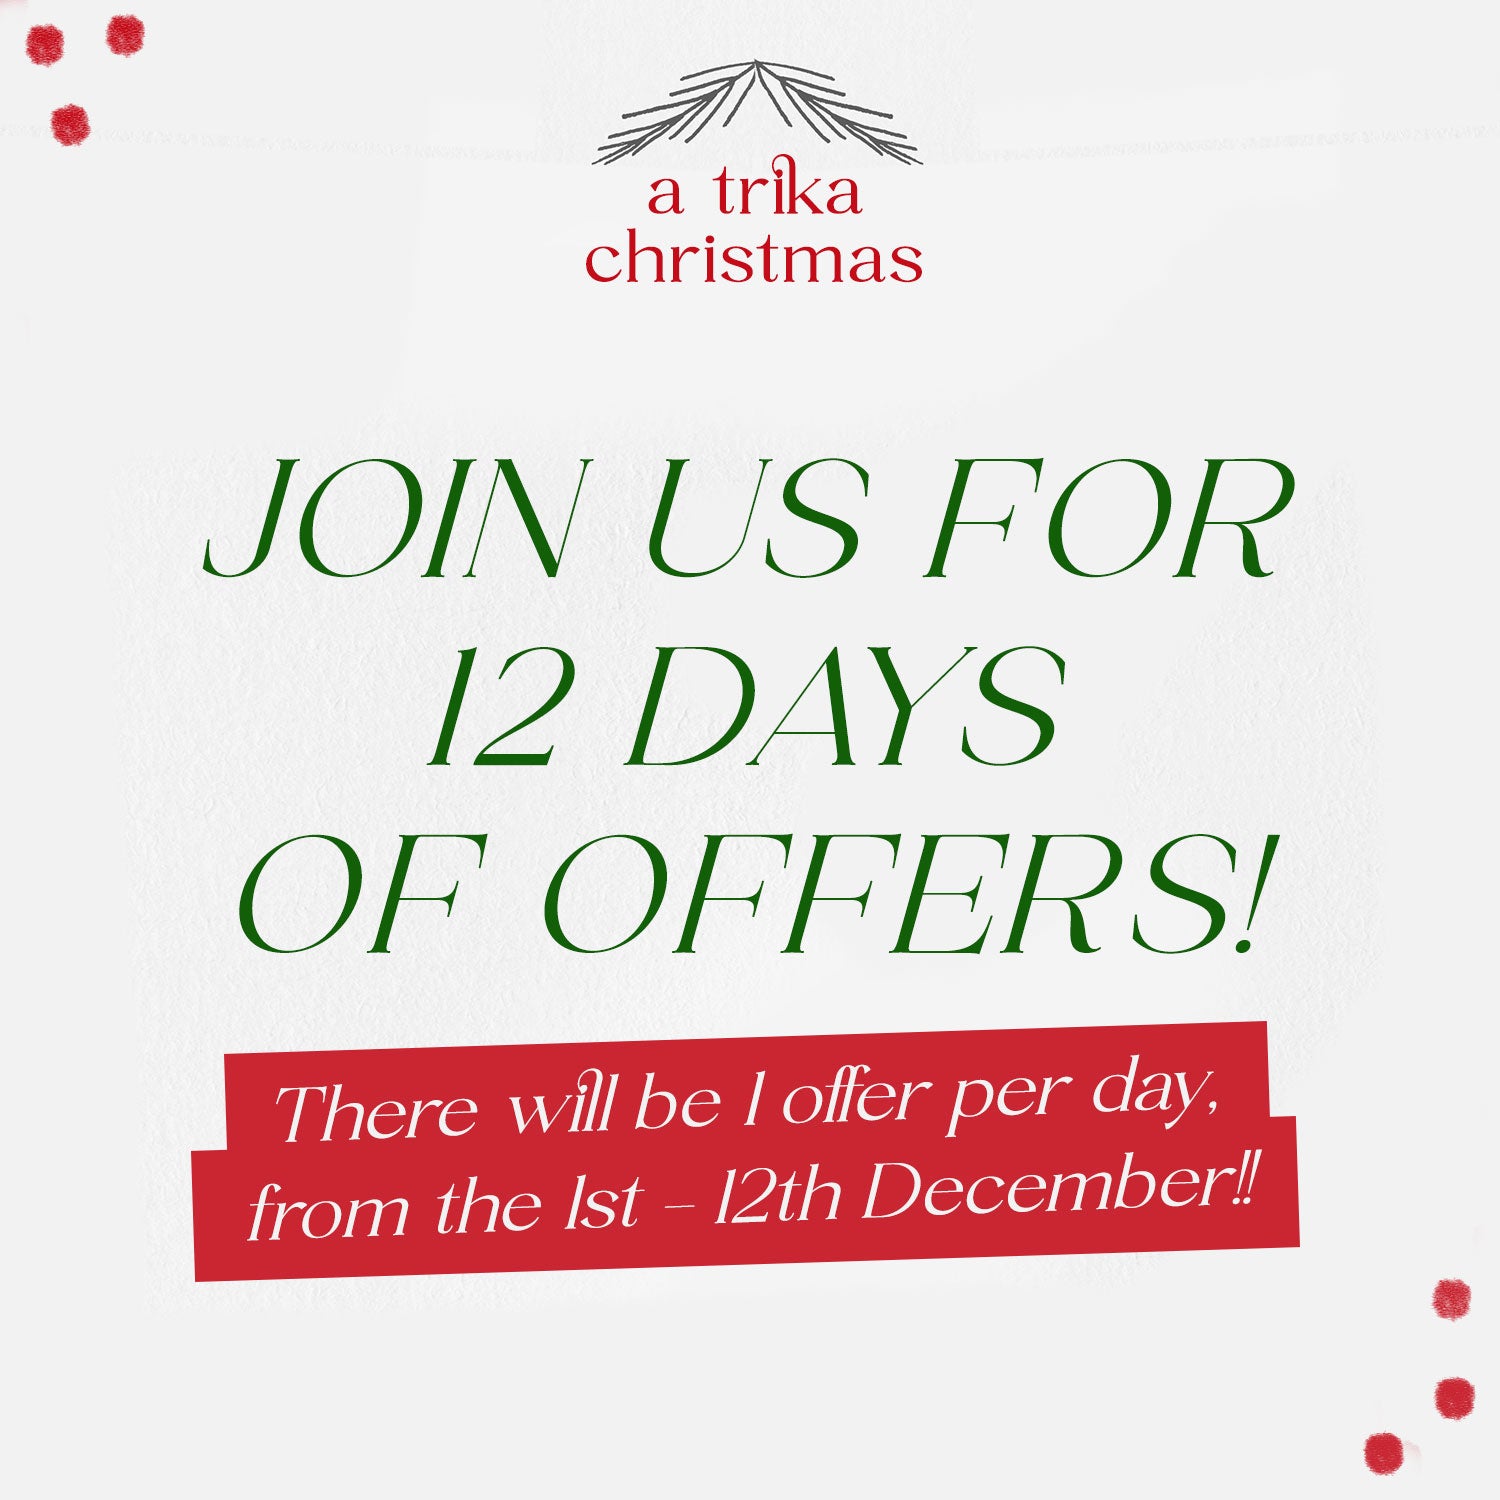 12 Days of Christmas at Trika! Special offers galore..